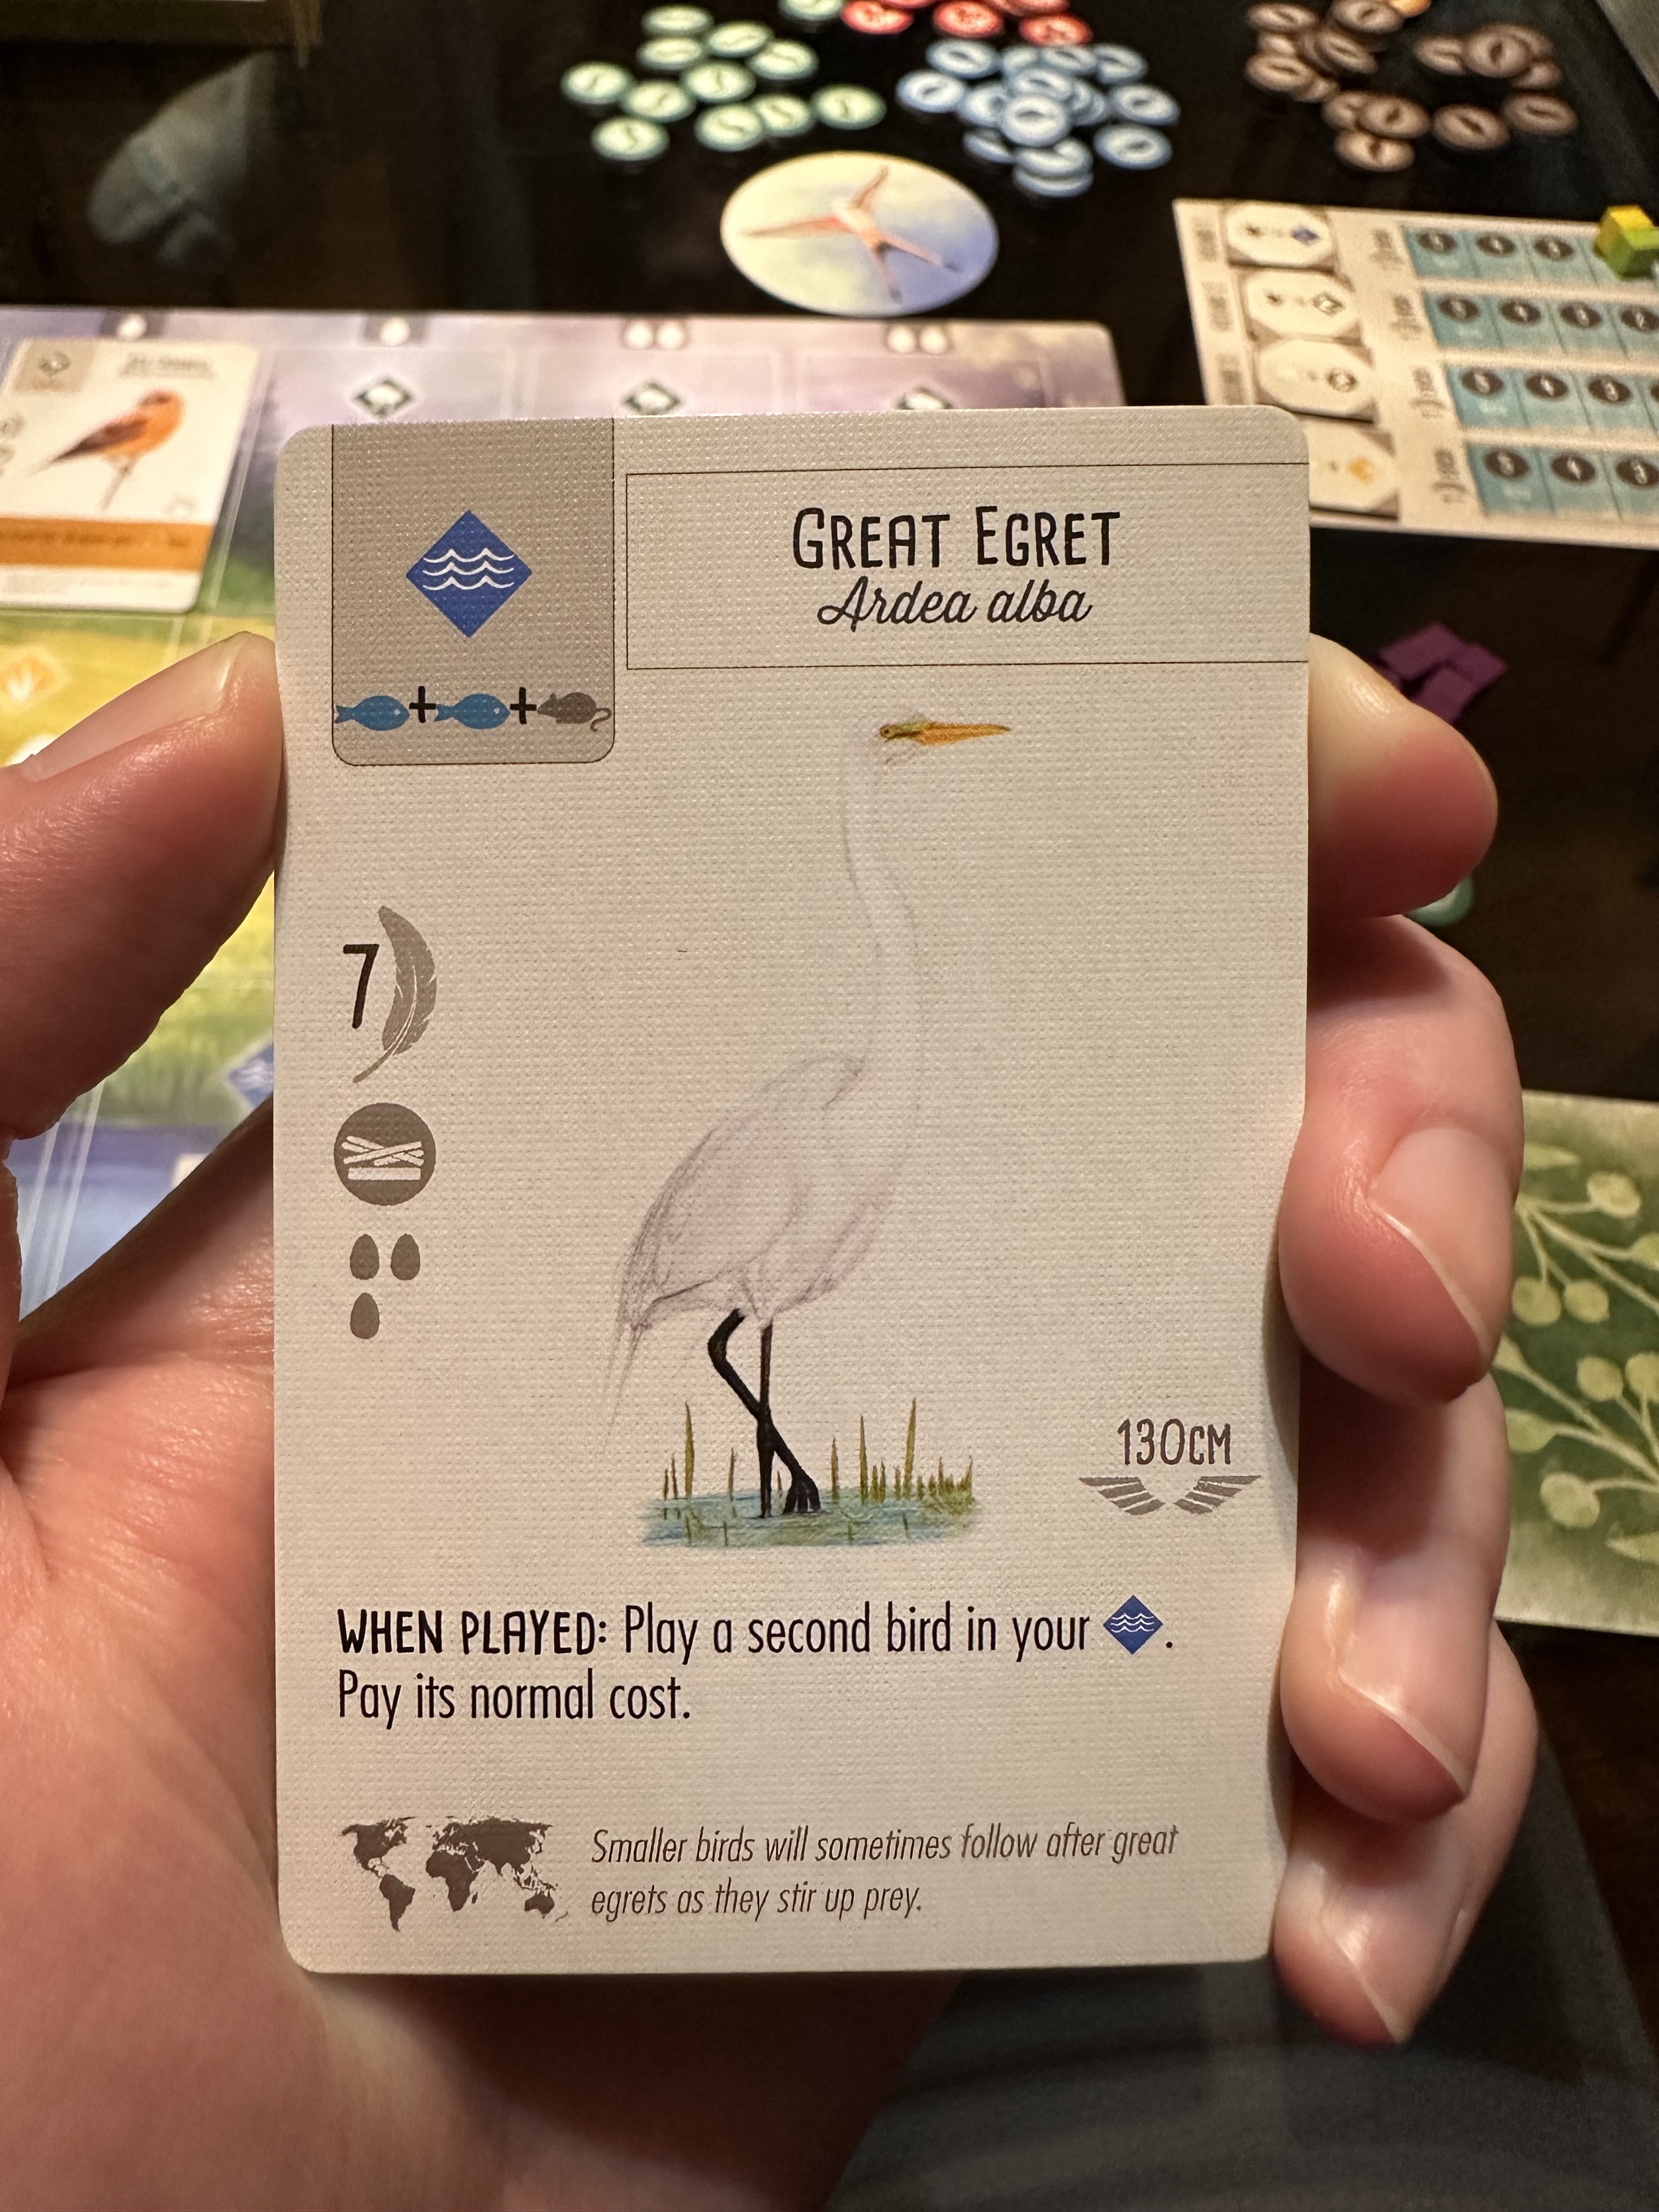 A picture of the "Great Egret" card from Wingspan.